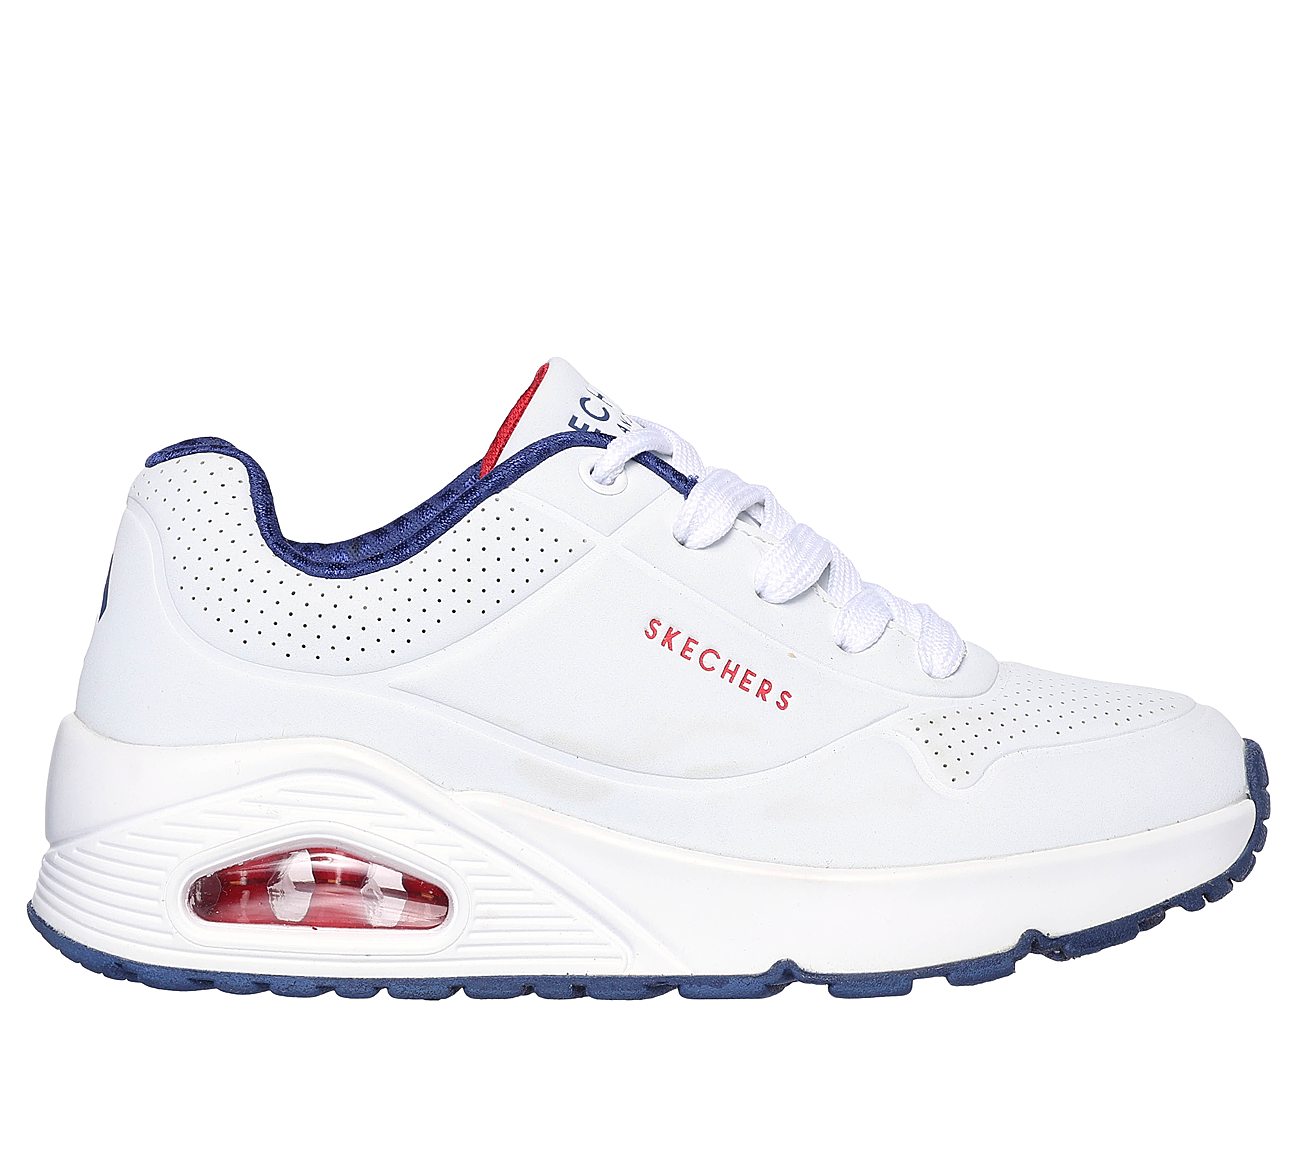 UNO - STAND ON AIR, WHITE/NAVY/RED Footwear Lateral View